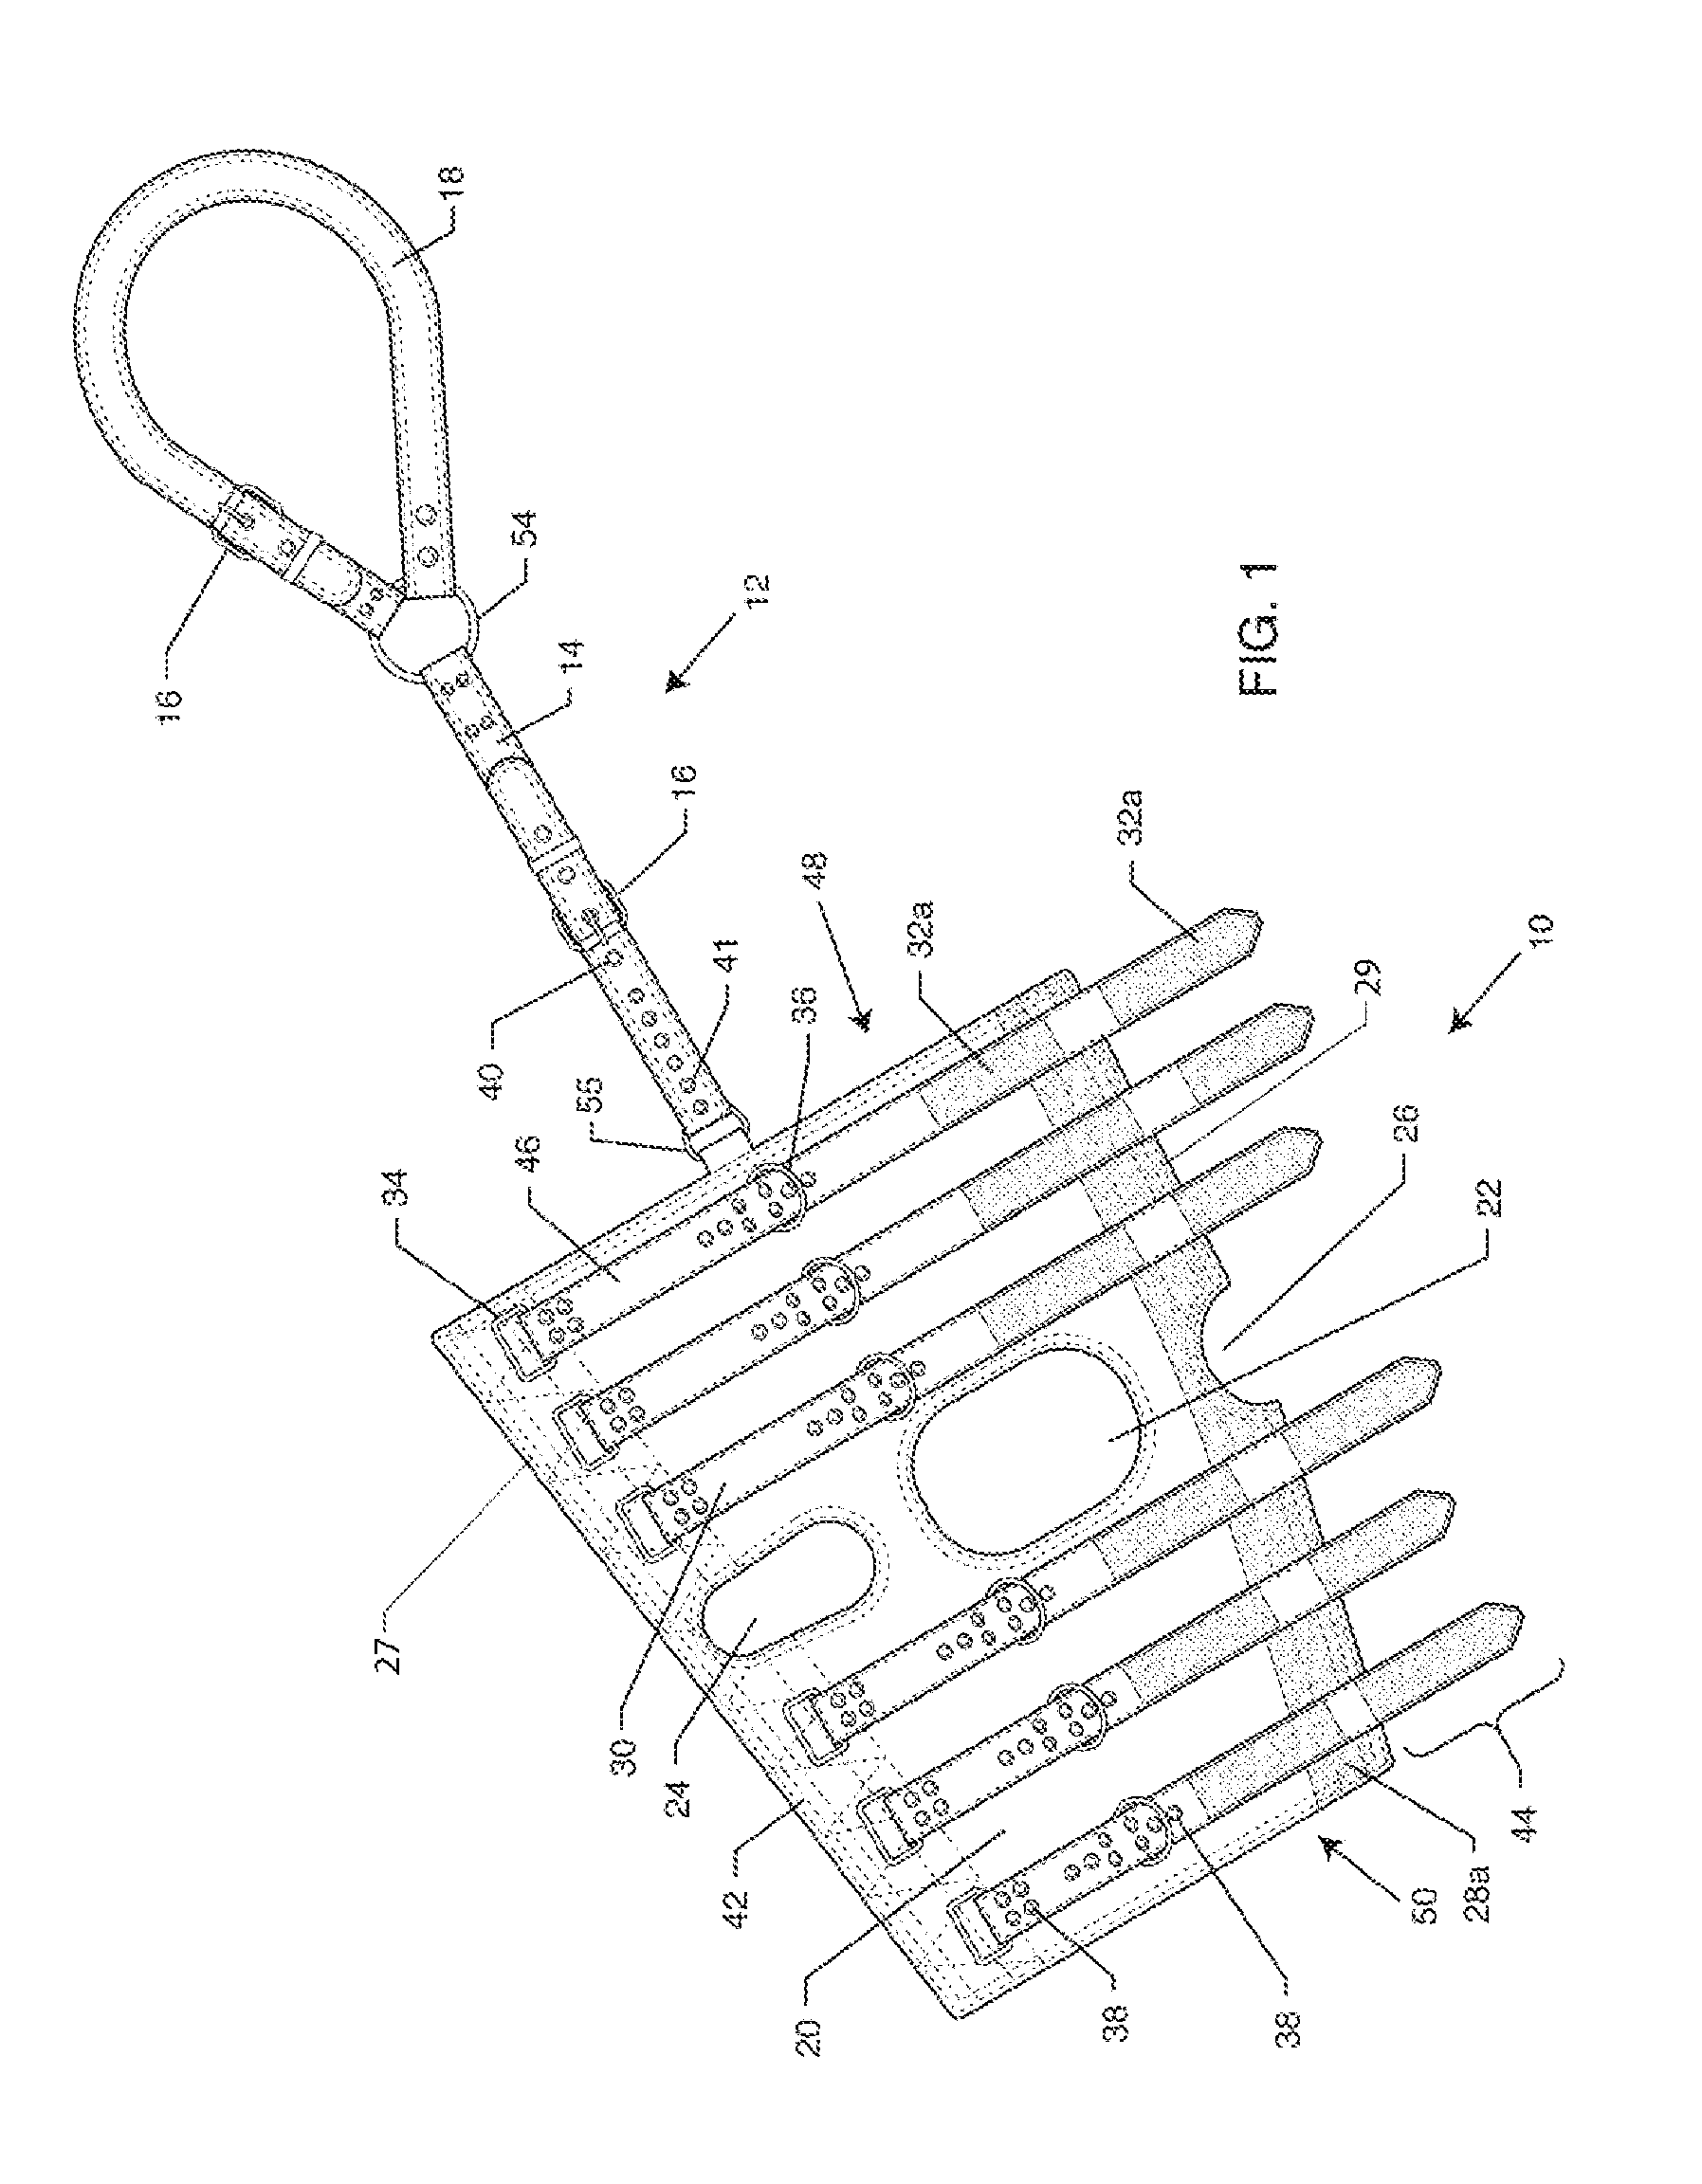 Exercise device for use with a prosthesis